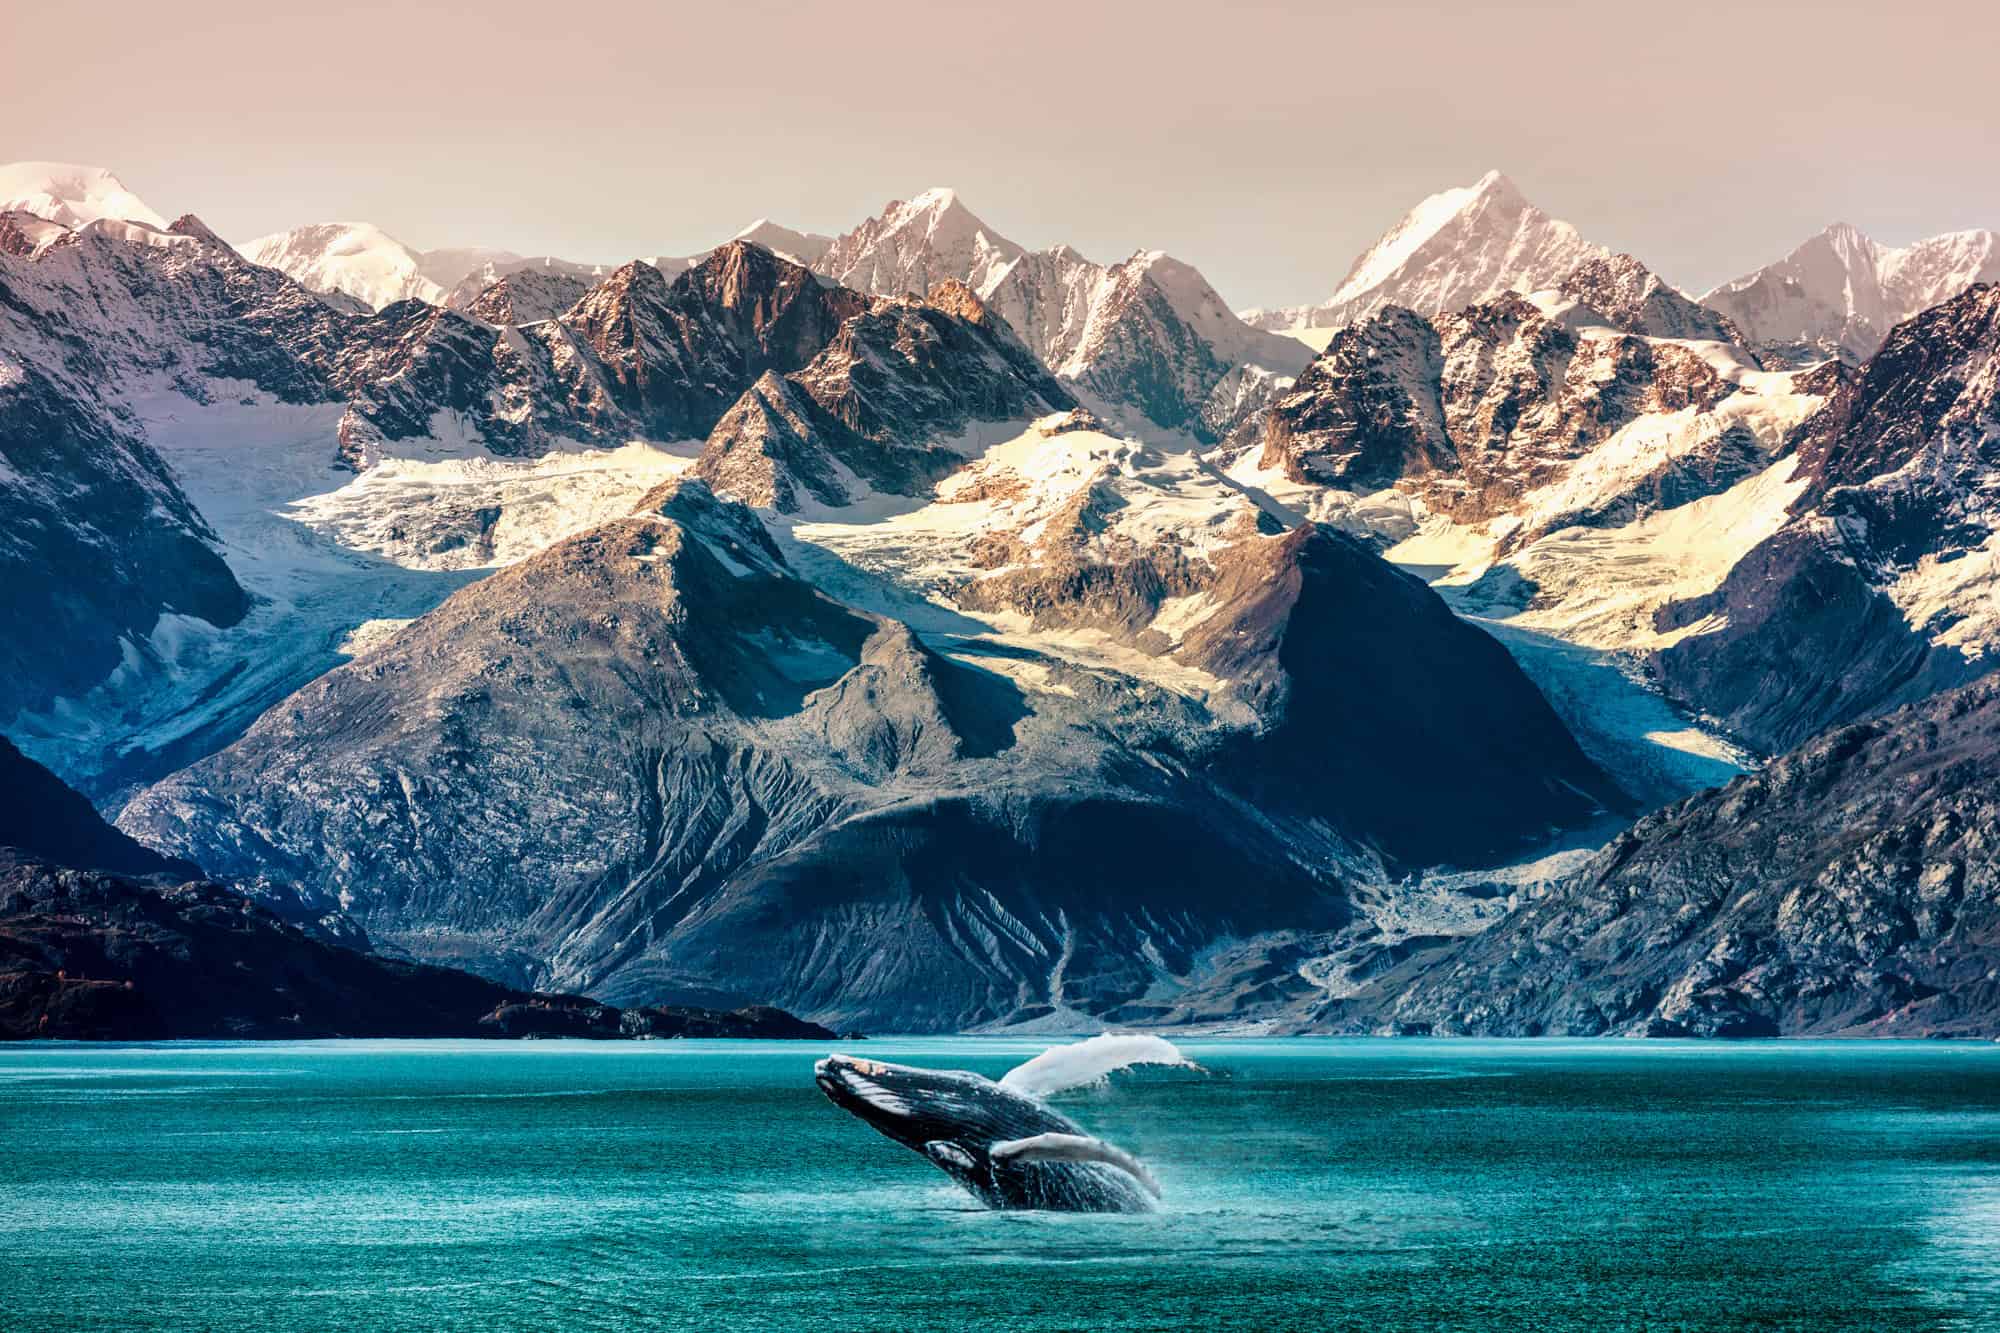 <p>Heading into <a href="https://www.travelalaska.com/Destinations/Parks-Public-Lands/Glacier-Bay-National-Park-Preserve" rel="noreferrer noopener">Glacier Bay</a> on a marine wildlife cruise is essentially hitting the jackpot for anyone who appreciates Mother Nature’s more dramatic moments – minus the drama of reality TV. Here, you’ll glide past towering glaciers that dwarf even the most inflated egos, <strong>witnessing chunks of ice calving into the steel-blue waters</strong> below. </p> <p>But it’s not just about ice; the bay is a bustling metropolis for sea creatures. You’re likely to spot humpback whales doing their version of morning stretches with fluke-up dives and breeches that put Olympic divers to shame, as <strong>this area serves as a crucial feeding ground for these giants</strong>. </p> <p>Other possibilities include sea otters, seals and sea lions, orcas, and dolphins. Expect to see various seabirds during your cruise as well.</p> <div class="wp-block-kadence-iconlist kt-svg-icon-list-items kt-svg-icon-list-items3695_0a9dad-a5 kt-svg-icon-list-columns-1 alignnone"> <ul class="kt-svg-icon-list"> <li class="wp-block-kadence-listitem kt-svg-icon-list-item-wrap kt-svg-icon-list-item-3695_10dd43-64"><span><strong>Best Time To Visit:</strong> Summer (May To September)</span></li> </ul> </div>  <div class="wp-block-kadence-iconlist kt-svg-icon-list-items kt-svg-icon-list-items3695_bf9978-20 kt-svg-icon-list-columns-1 alignnone"> <ul class="kt-svg-icon-list"> <li class="wp-block-kadence-listitem kt-svg-icon-list-item-wrap kt-svg-icon-list-item-3695_08426f-27"><span><strong>Discover More:</strong> <em>Pivoting our adventure focus, how about we take a quick detour through <a href="https://discoverparksandwildlife.com/5-minute-guide-to-zion-national-park/">our 5-minute primer on Zion National Park</a>?</em></span></li> </ul> </div>